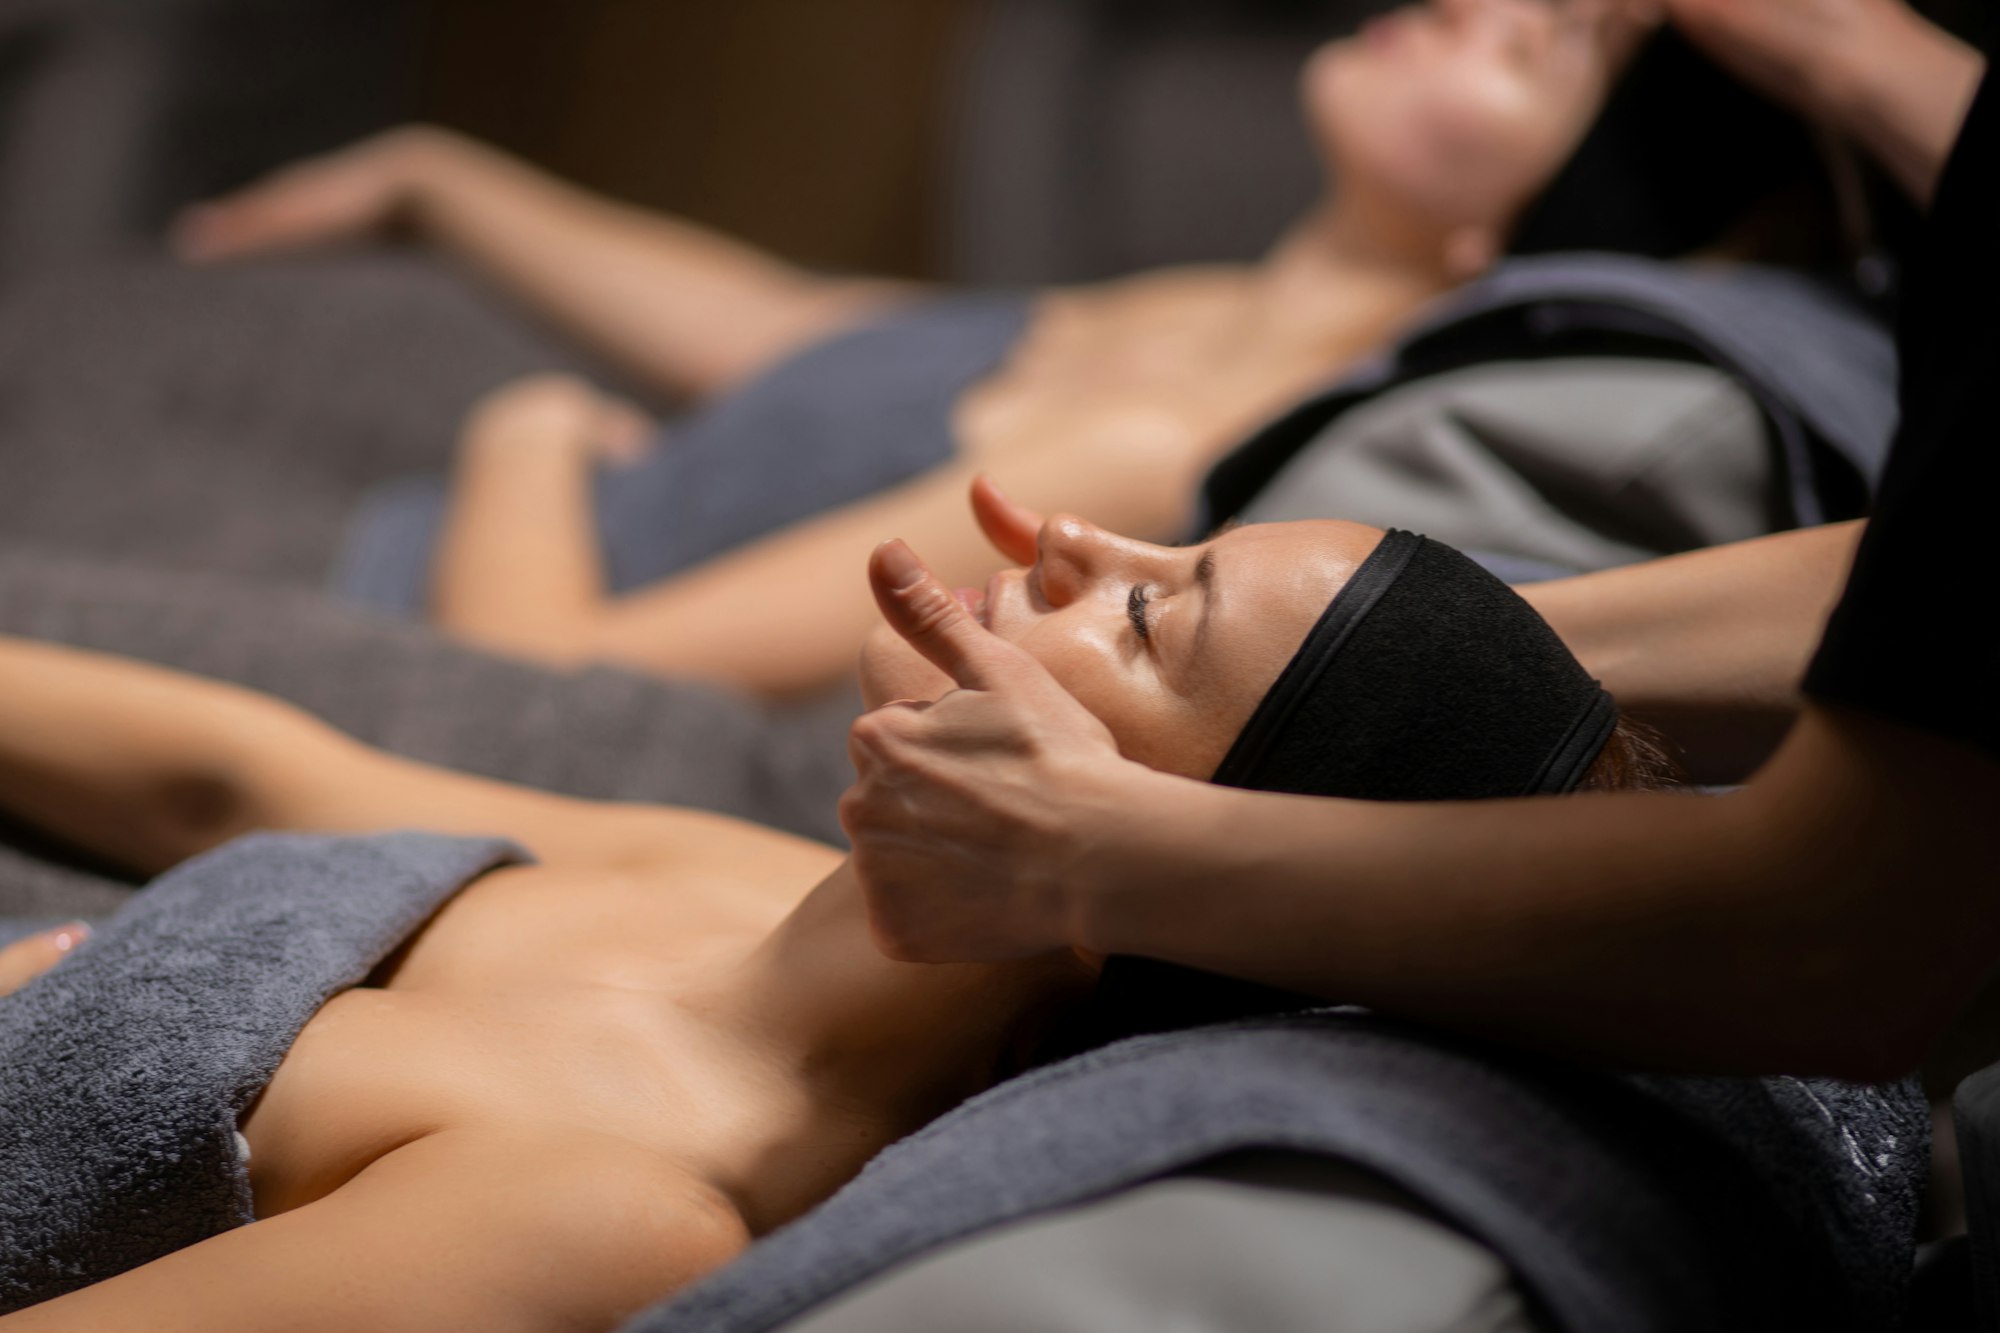 two women get face and neck massage in spa salon